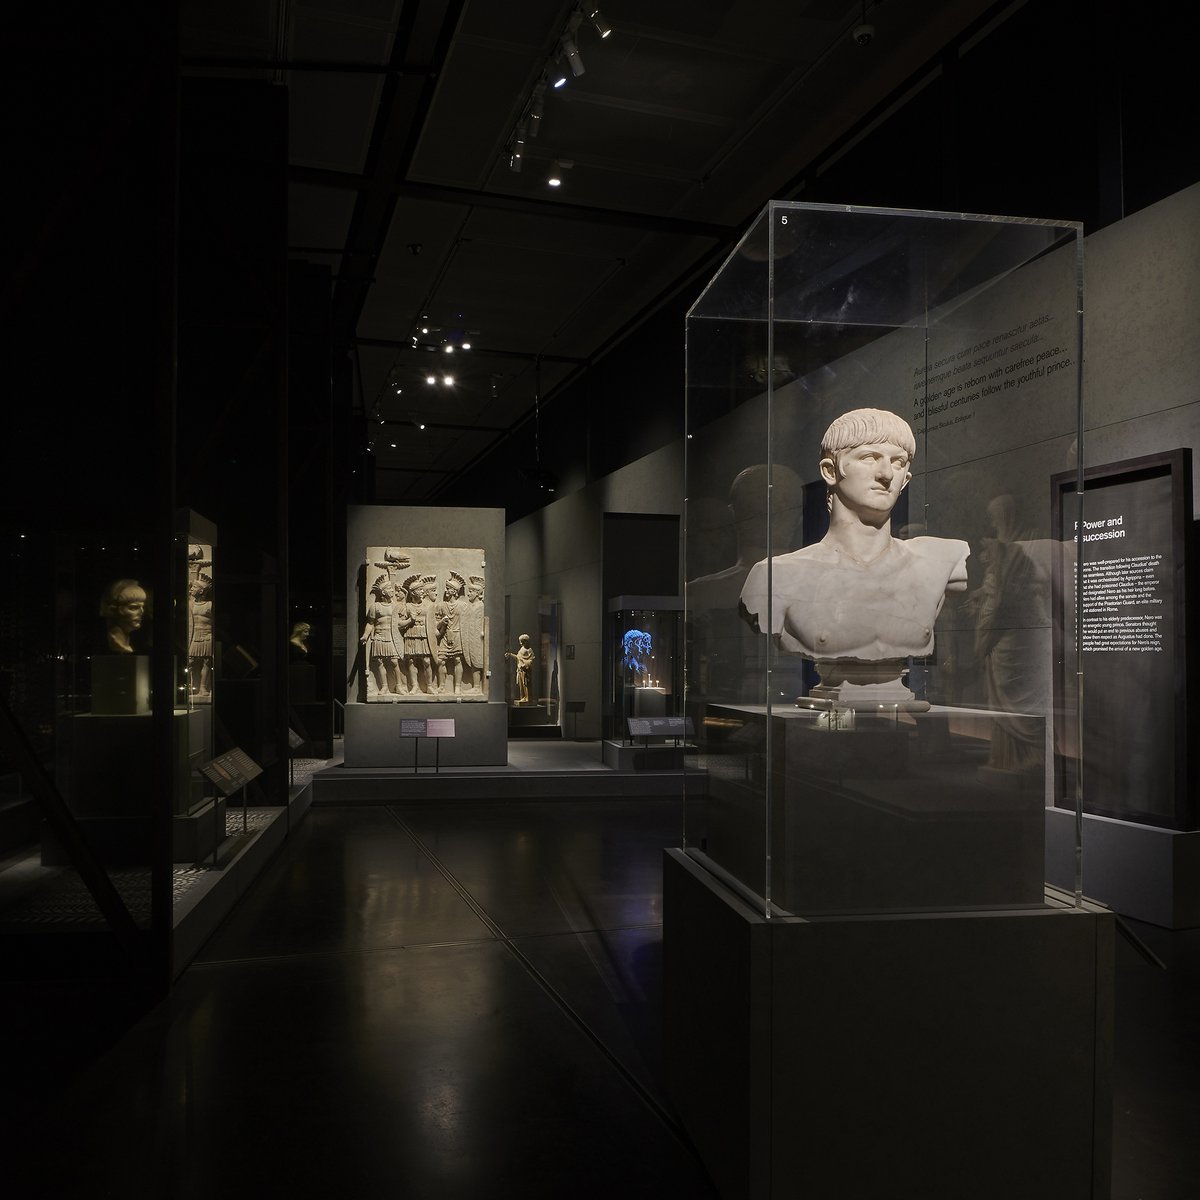 Inside the exhibition - a marble bust of Nero is in the foreground, and a stone relief showing the praetorian guard is behind it. 